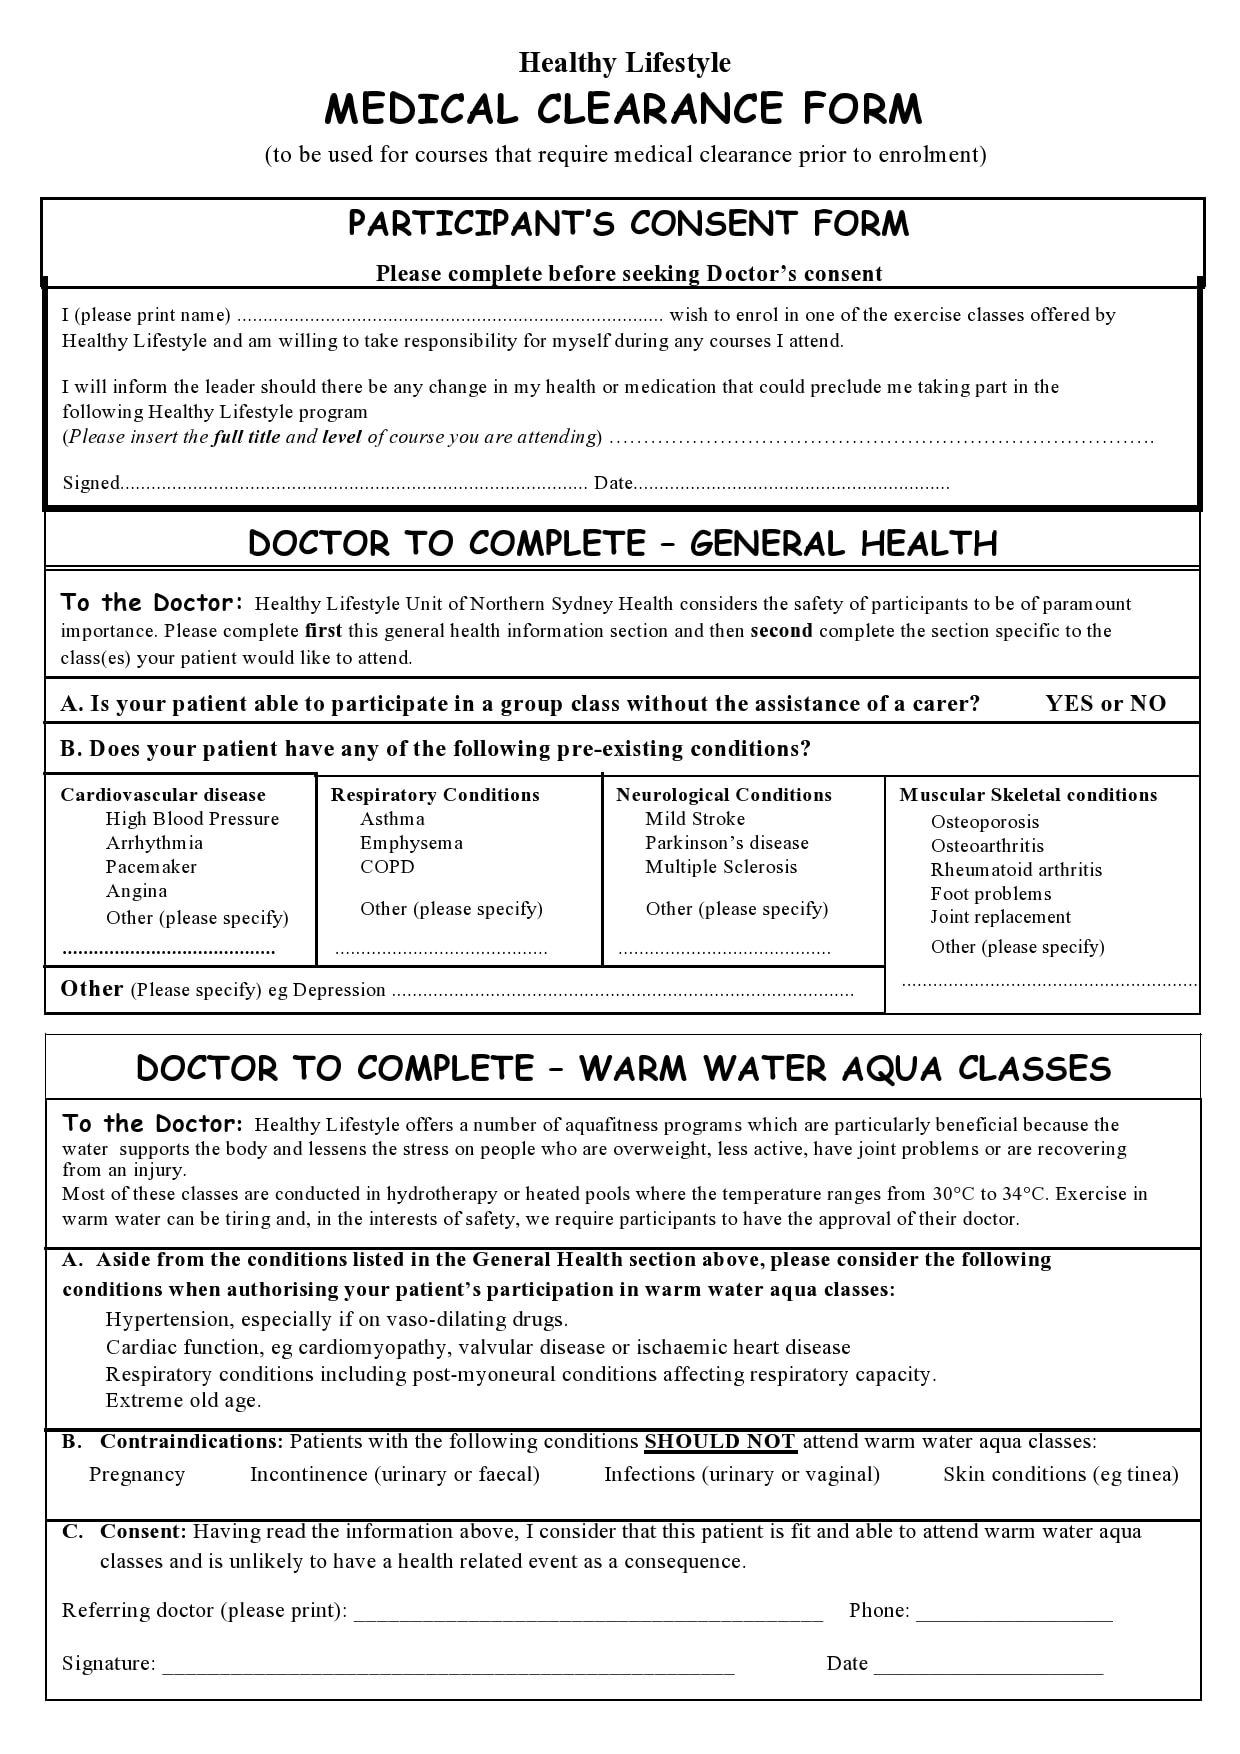 30 Editable Medical Clearance Forms Letters Printabletemplates